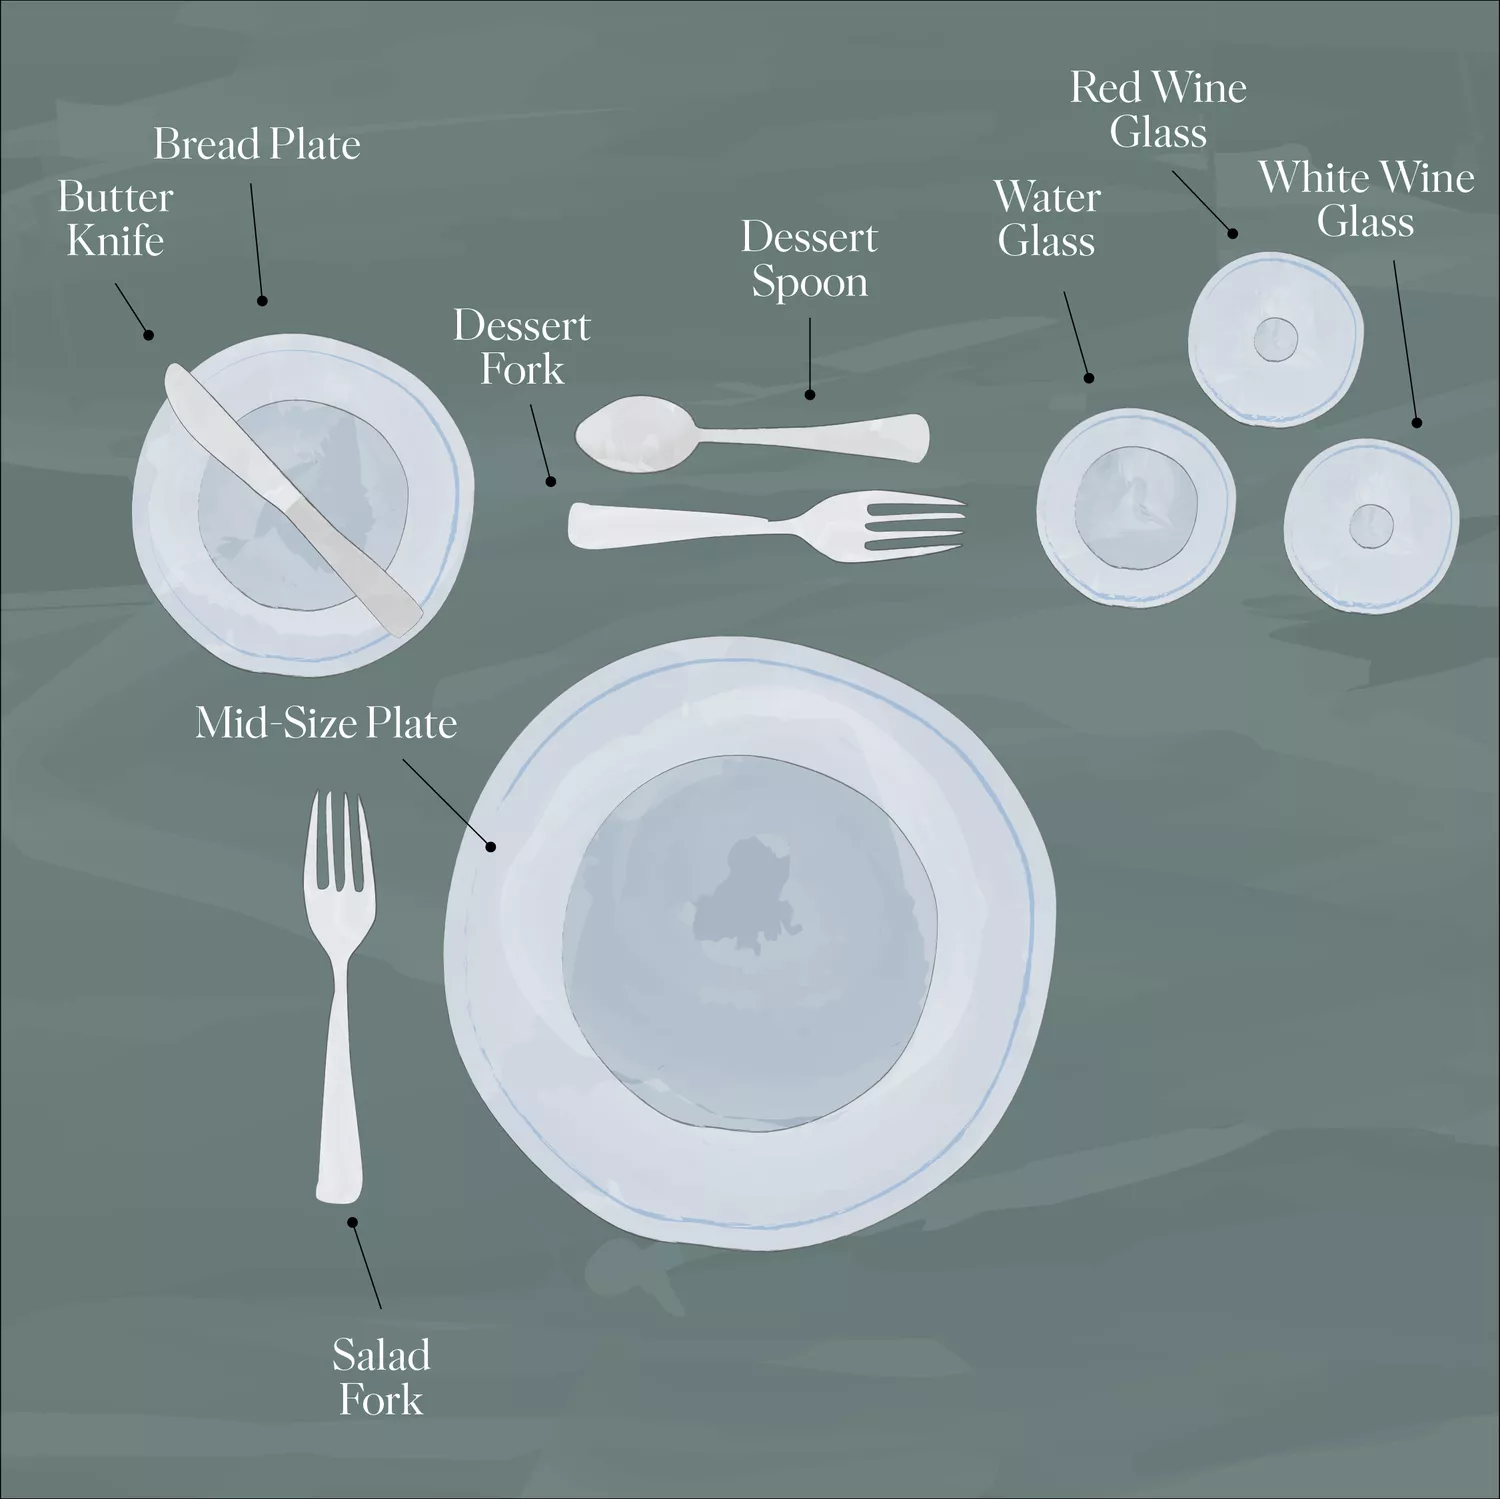 Illustration of Salad Fork Placement on Dining Table